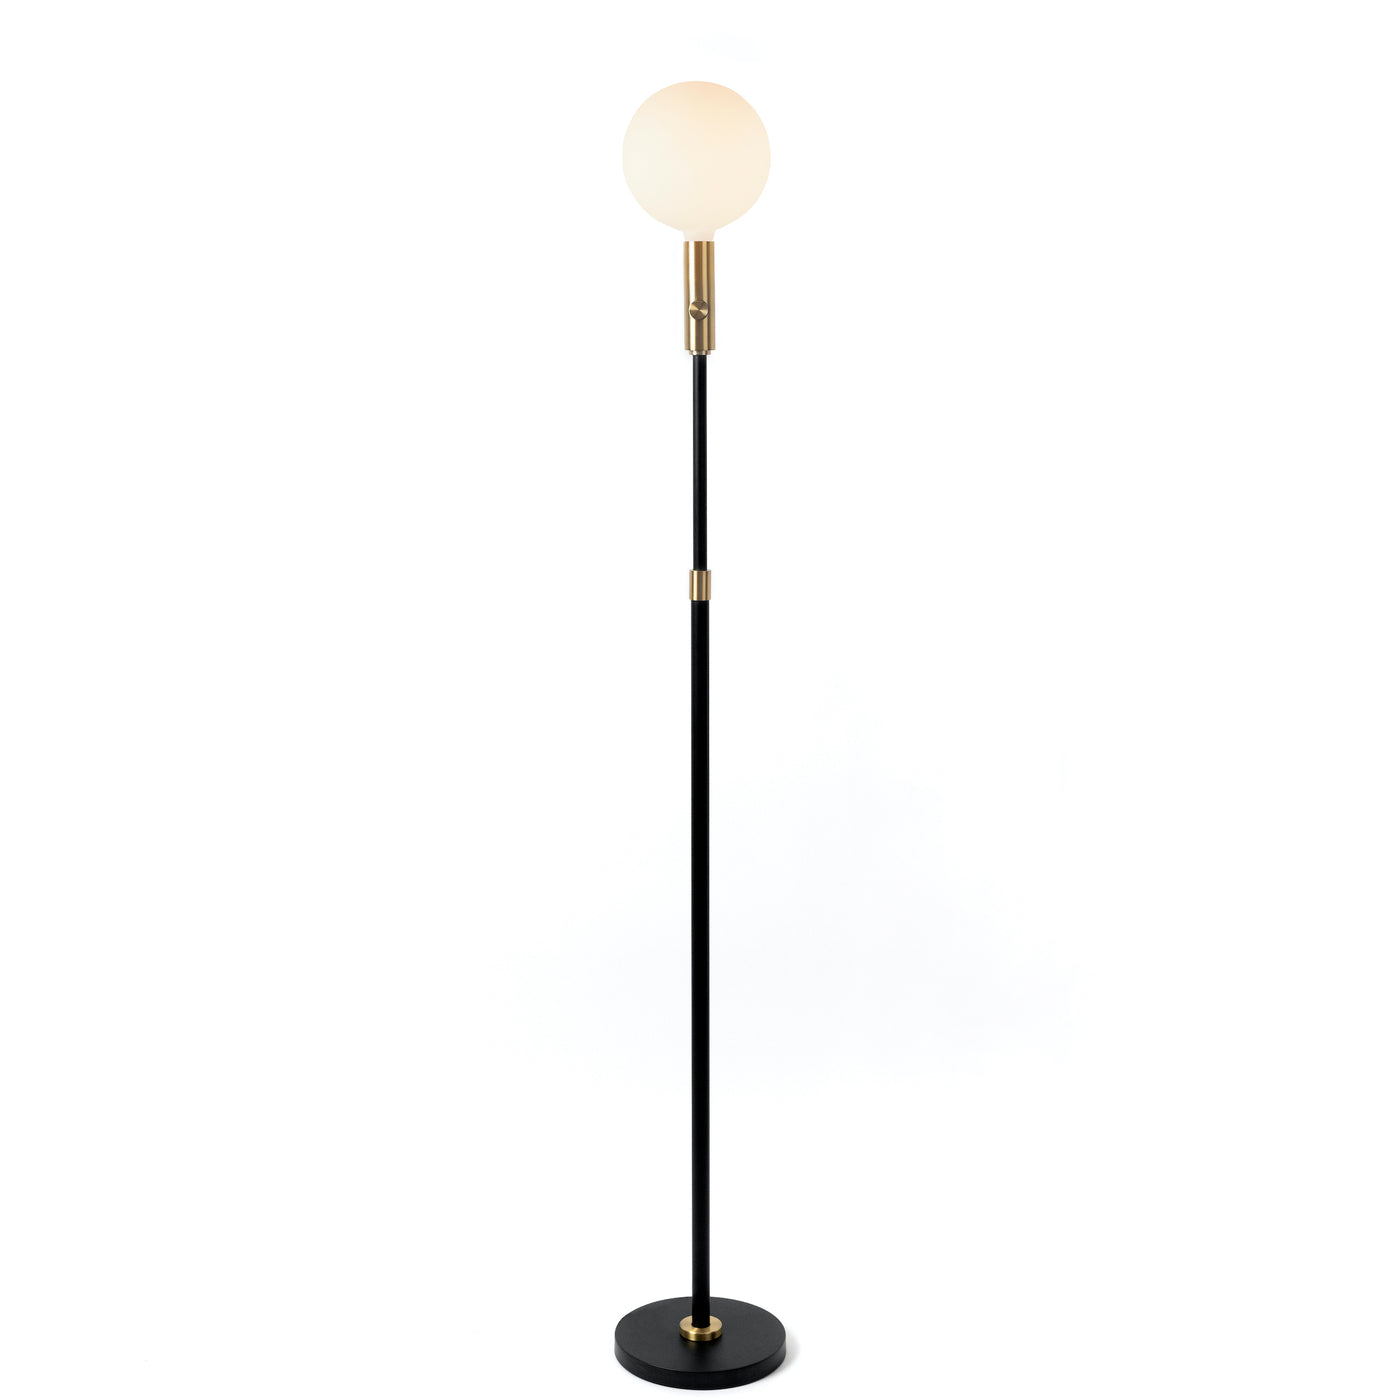 Tala Poise Floor Lamp. Free UK delivery at someday designs. #colour_brass